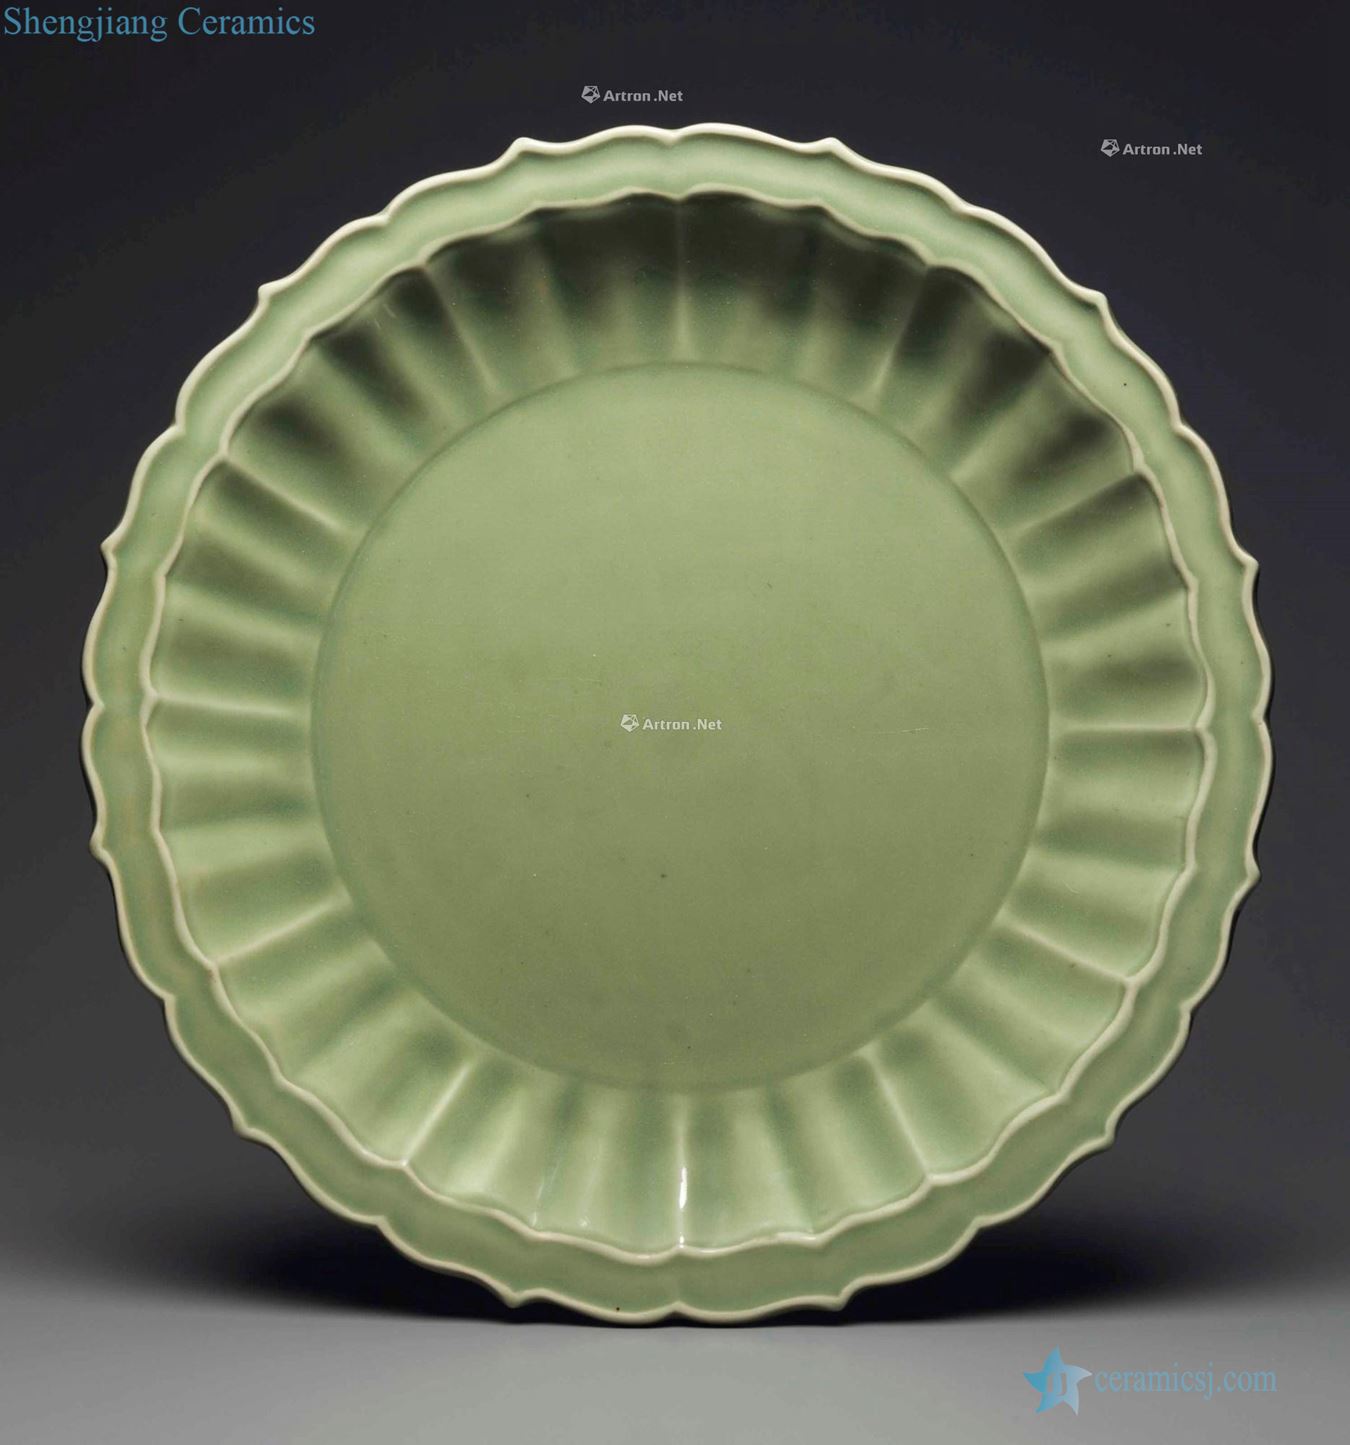 Ming, in the early 14th century - the late 15th century A SUPERB LARGE LONGQUAN CELADON BRACKET - LOBED DISH